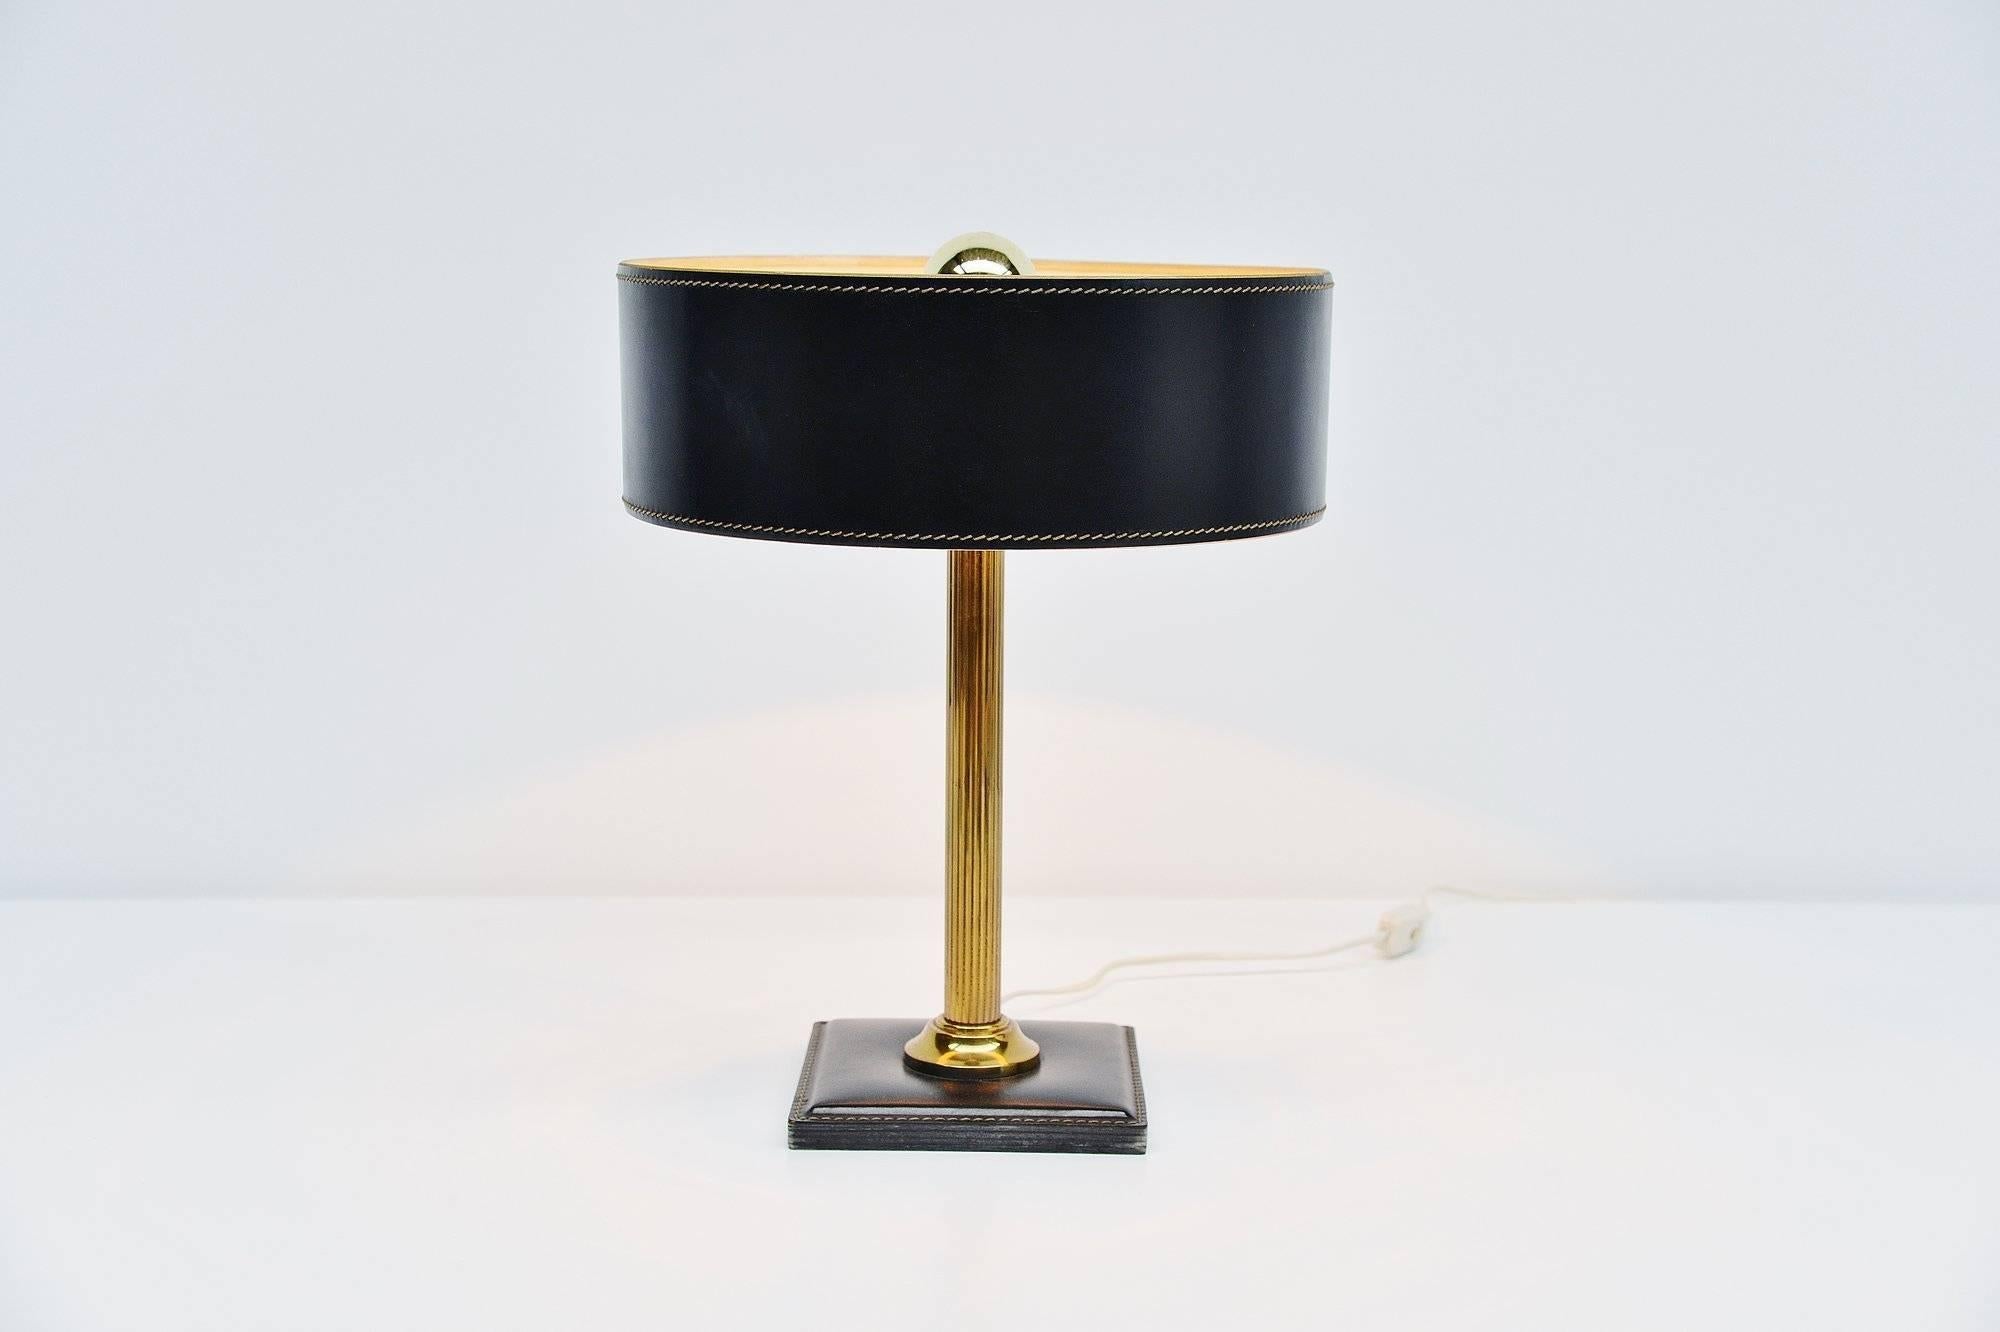 Very nice quality table lamp designed and manufactured by Jacques Adnet, France, 1960. This lamp has a square black leather base with a brass bar, the shade is also in black leather. Nicely stitched as all the works by Adnet are. The lamp gives very